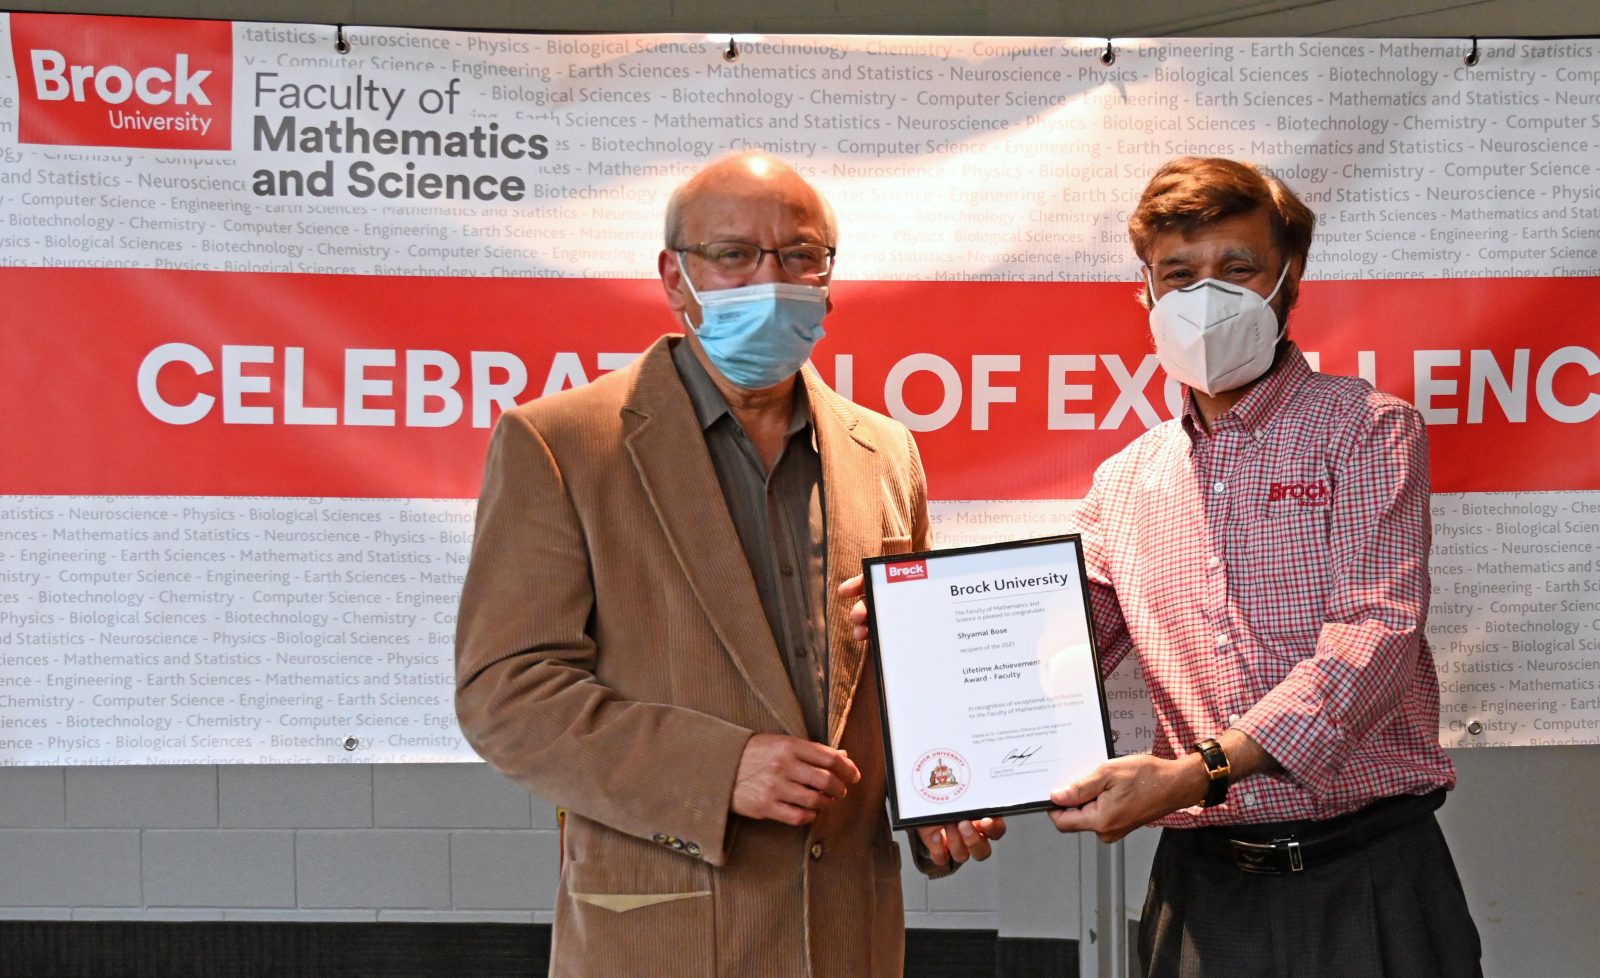 Two men stand in front of event banner jointly holding a framed award certificate and smiling for the camera. Both men wear medical masks and semi-formal attire.